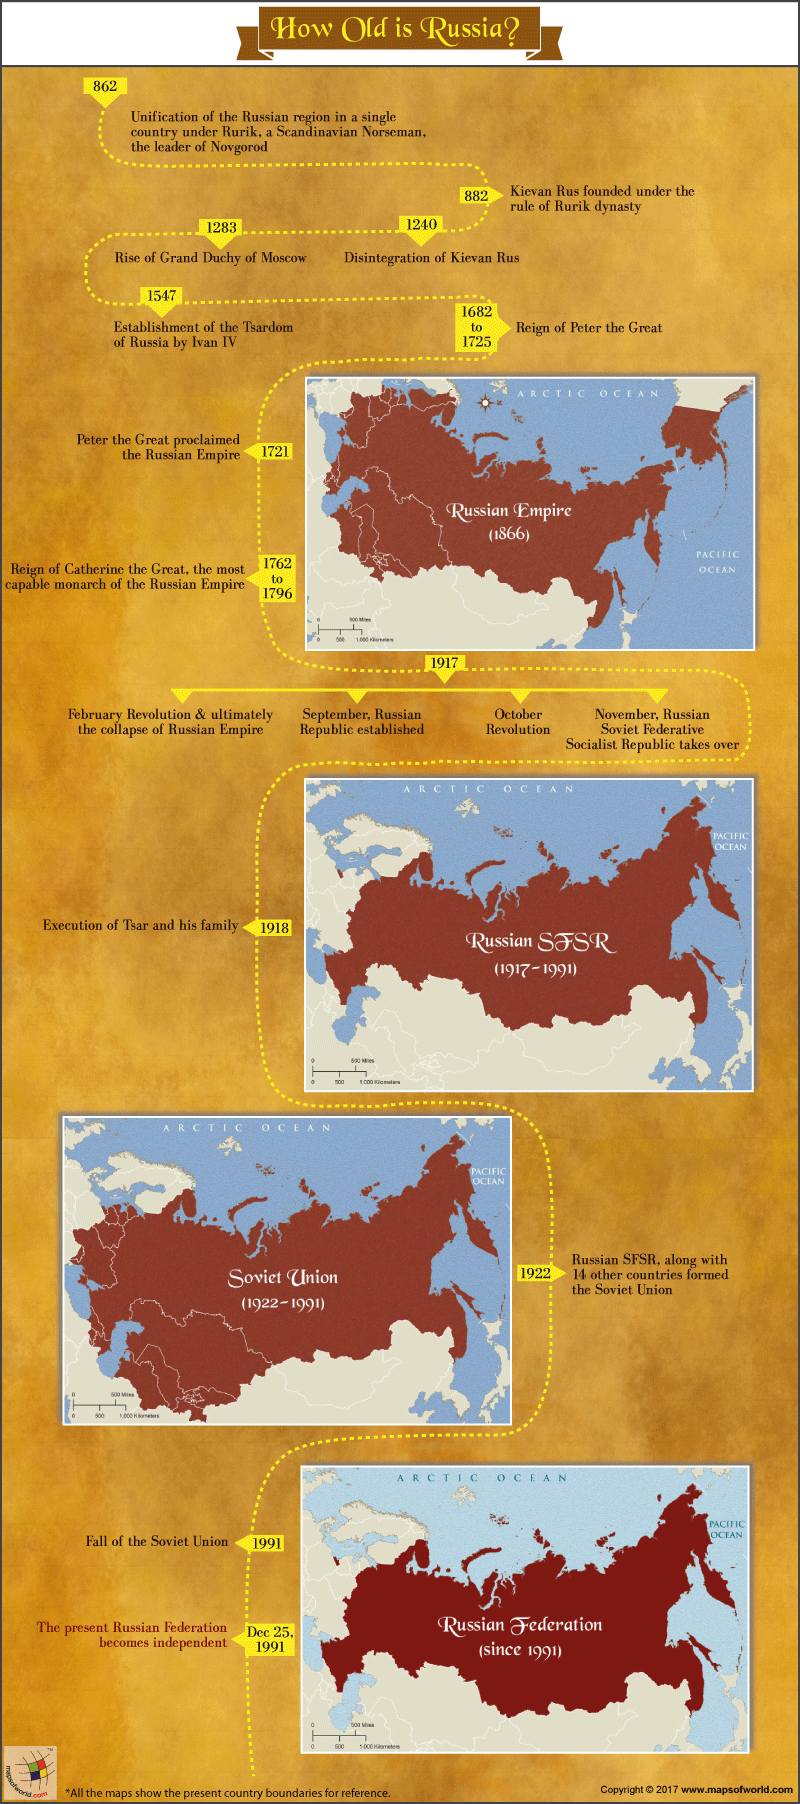 Infographic - How Old is Russia